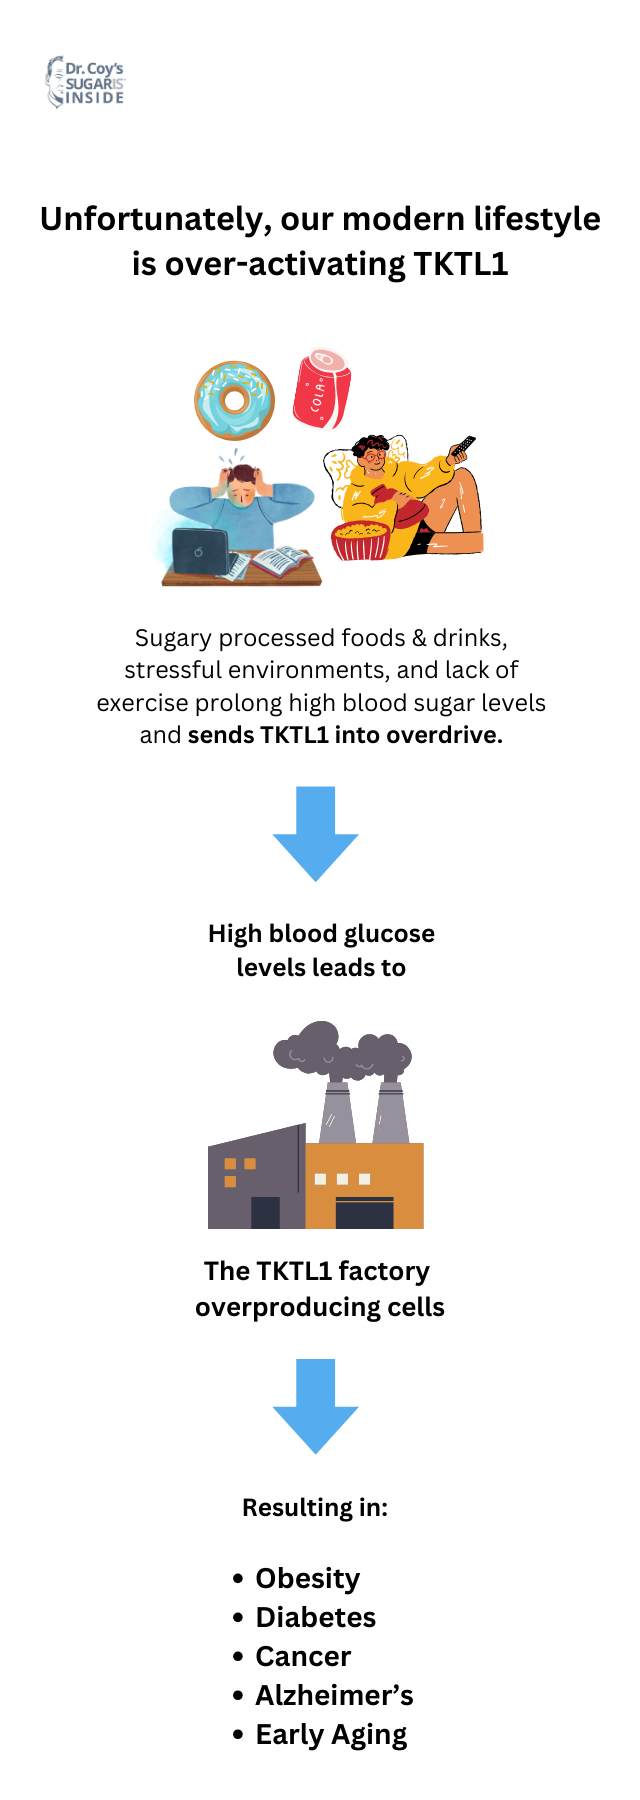 Infographic explaining how sugary, processed food and drinks, stressful environments and lack of exercise prolong high blood-sugar levels and and sends TKTL1 into overdrive